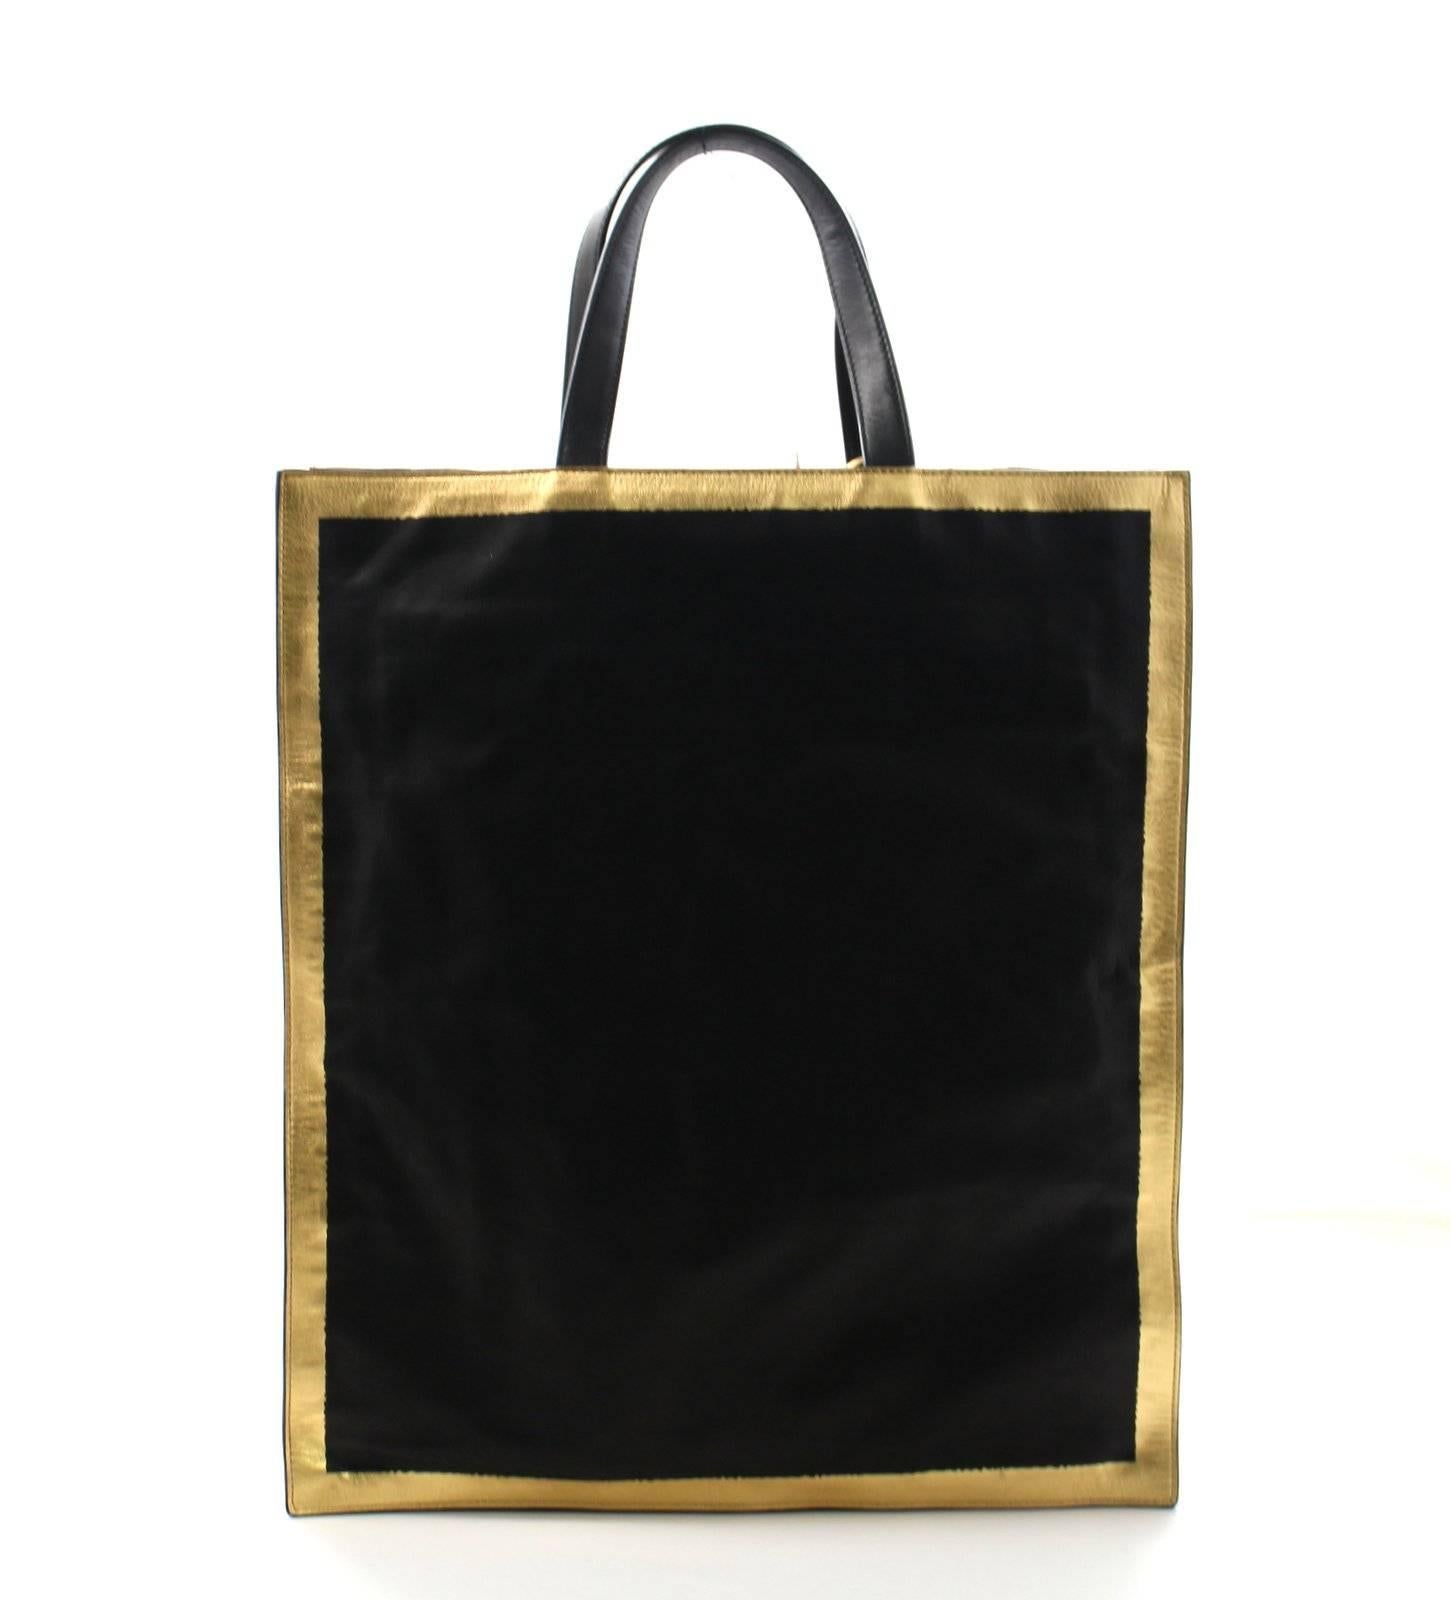 NEW, Never Carried!!!  Bottega Veneta Black Leather North South Tote Bag
Retail price $1,920.00
Soft black leather rectangular tote is slim and elegant.  Metallic gold leather geometrically trims the edges all the way around.  Double leather